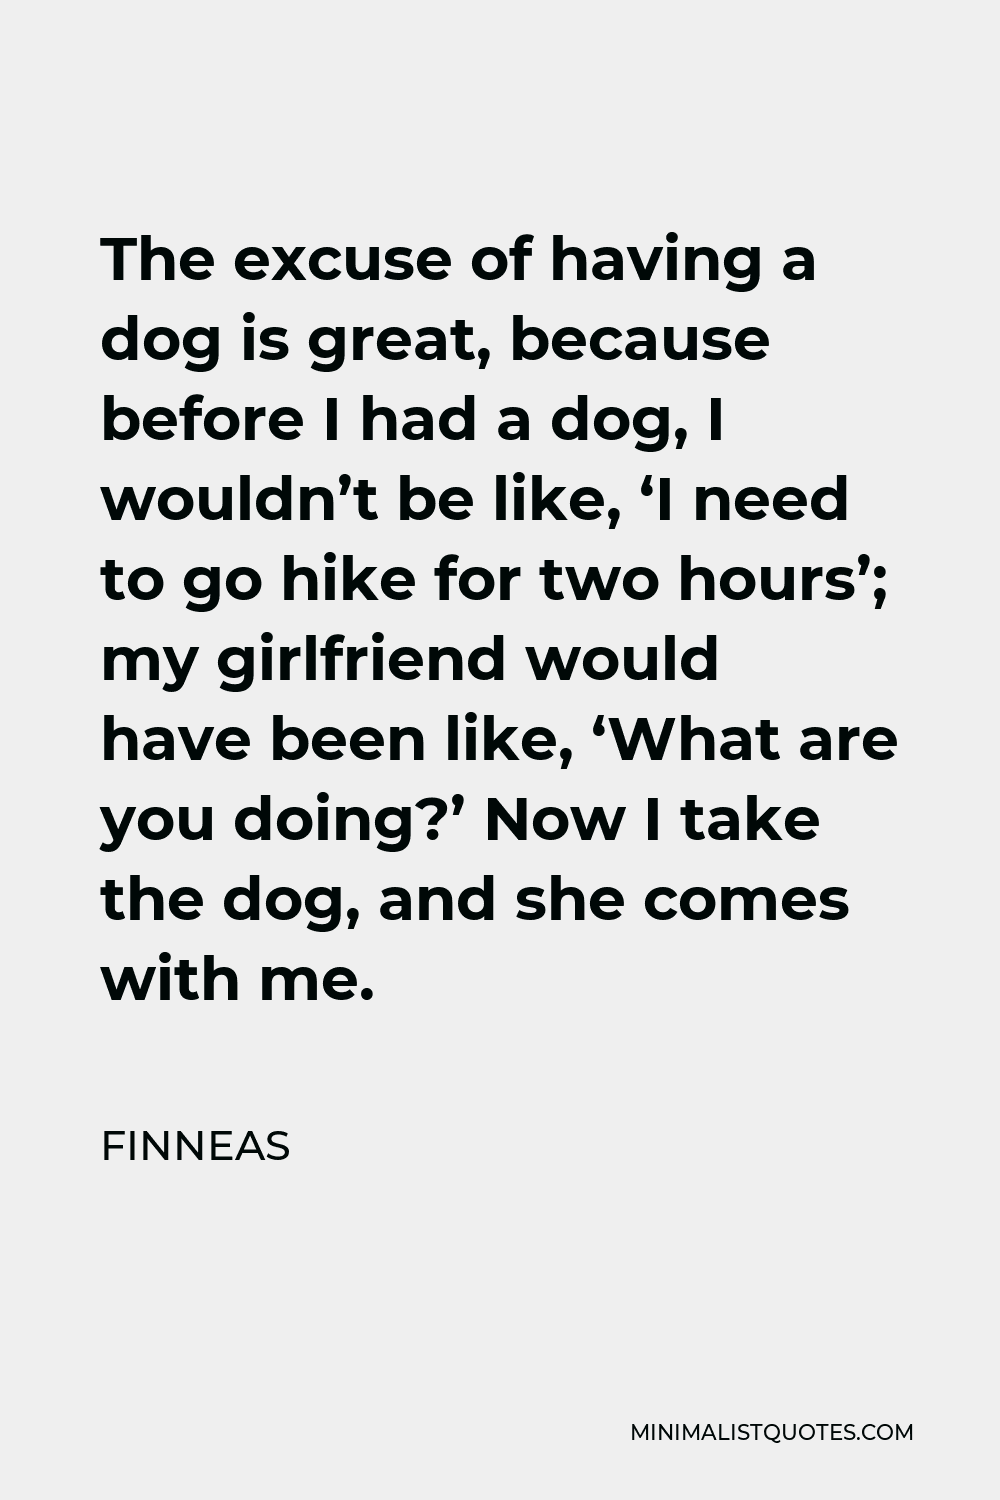 Finneas Quote - The excuse of having a dog is great, because before I had a dog, I wouldn’t be like, ‘I need to go hike for two hours’; my girlfriend would have been like, ‘What are you doing?’ Now I take the dog, and she comes with me.